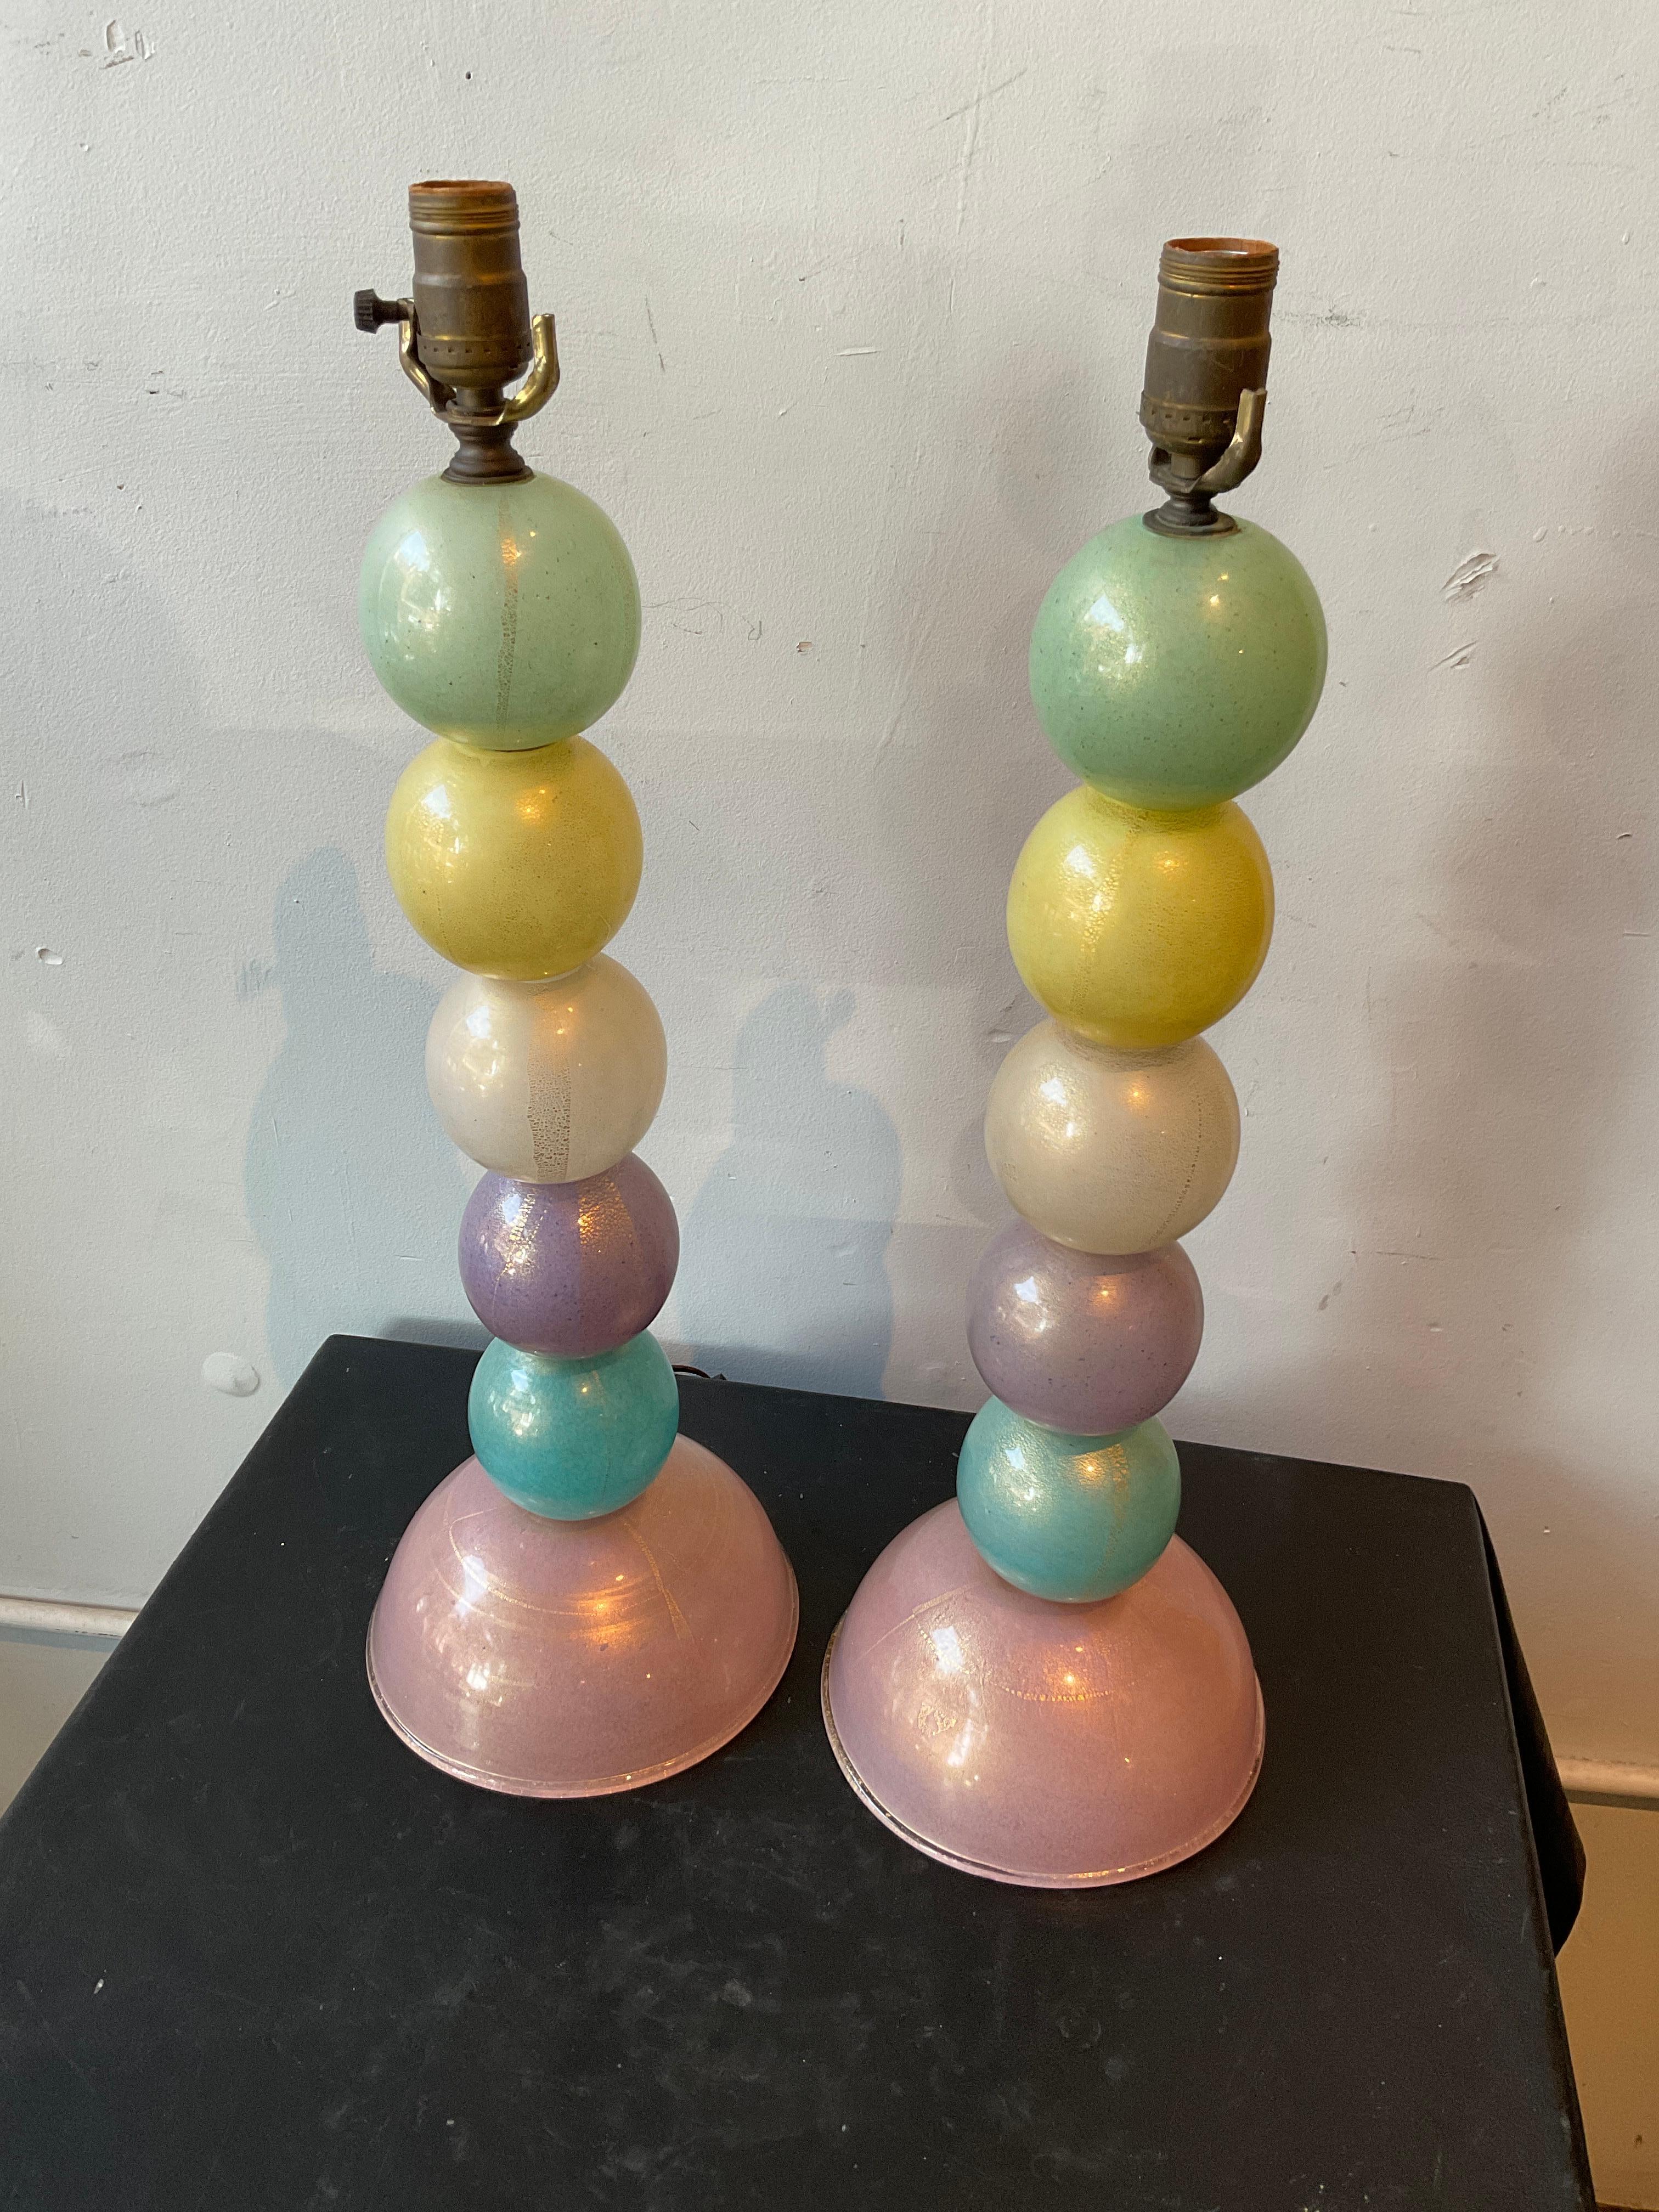 Pair of 1940s Barovier And Toso  multi color ball  Murano lamps. One lamps rod has a slight bend in it. Rod needs replacing , or bent back in place.Paper label that says Barovier and Toso.